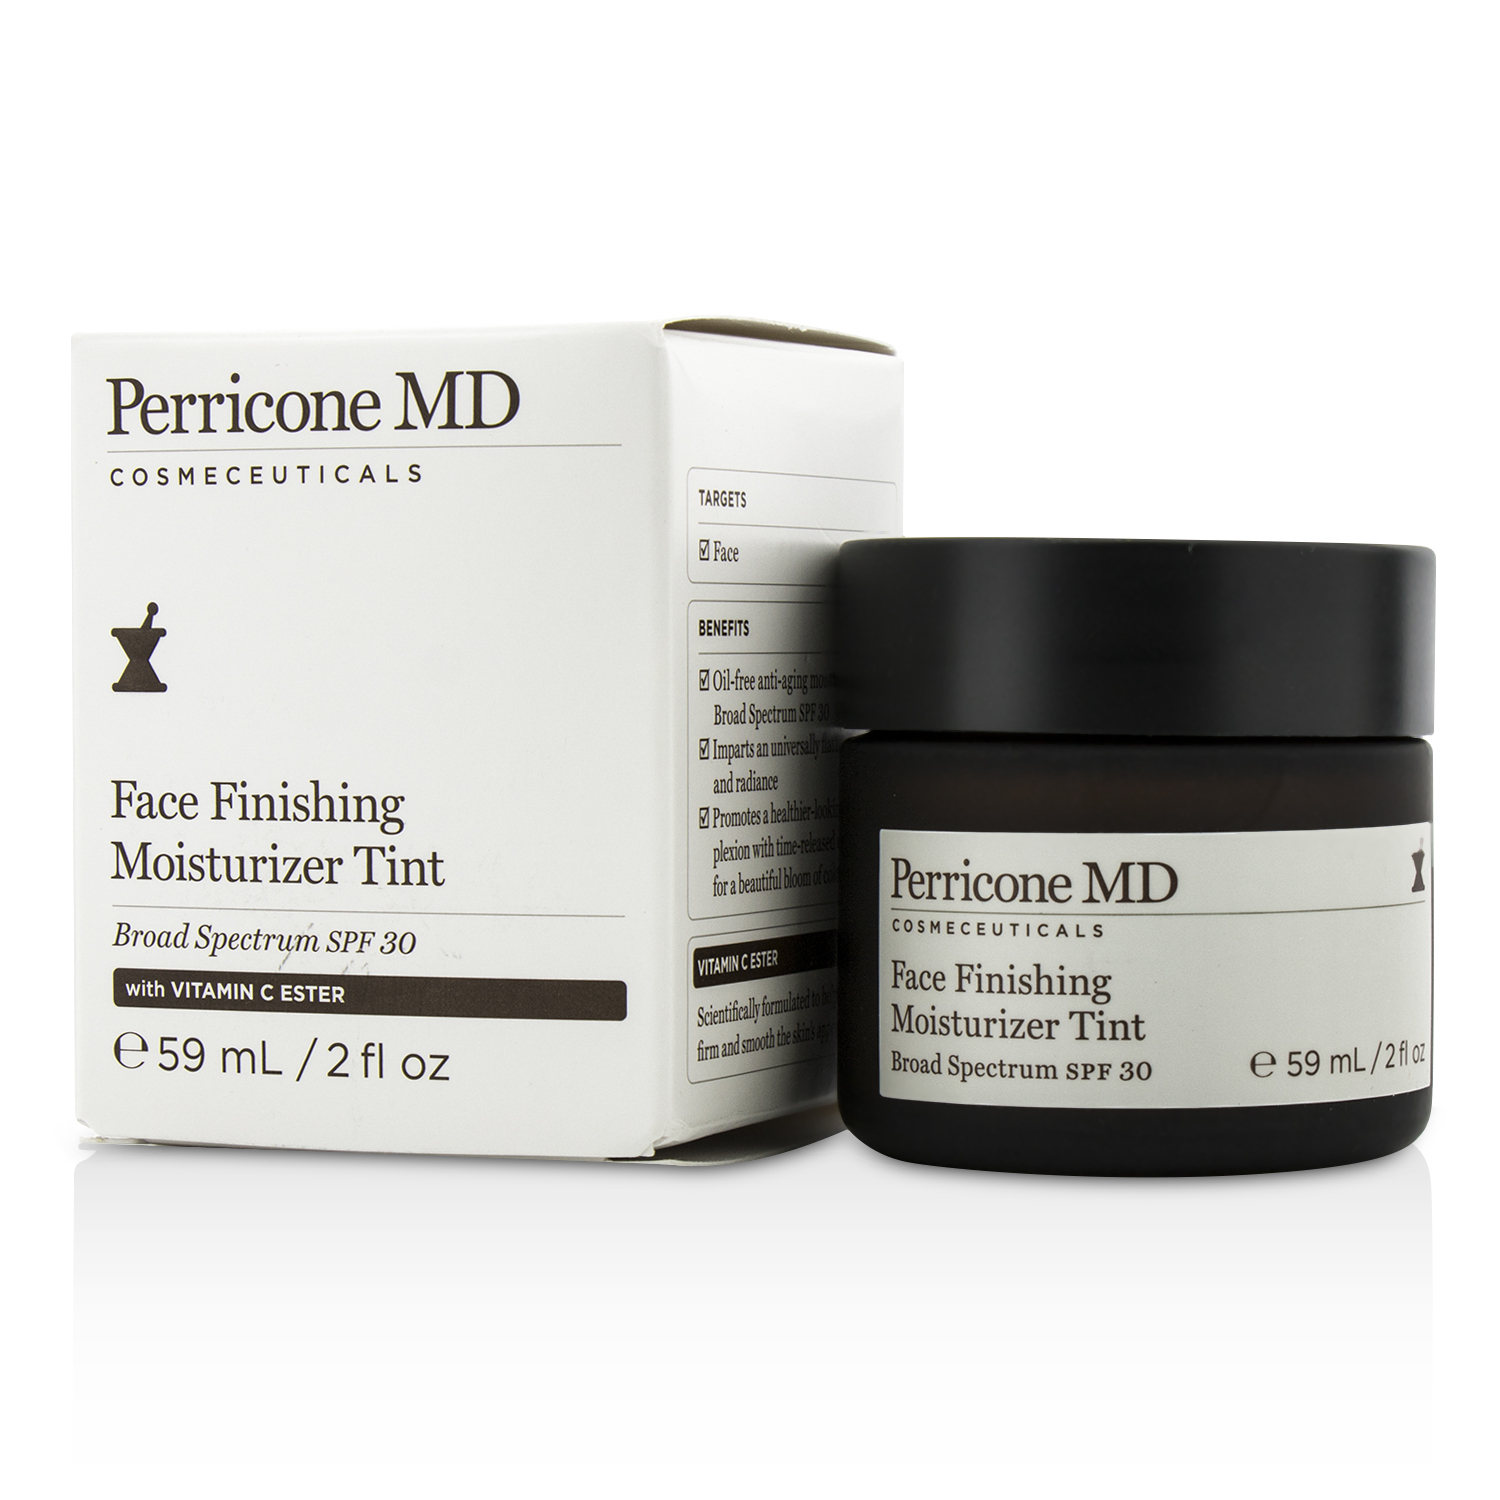 Face Finishing Moisturizer Tint SPF 30 Perricone MD Image